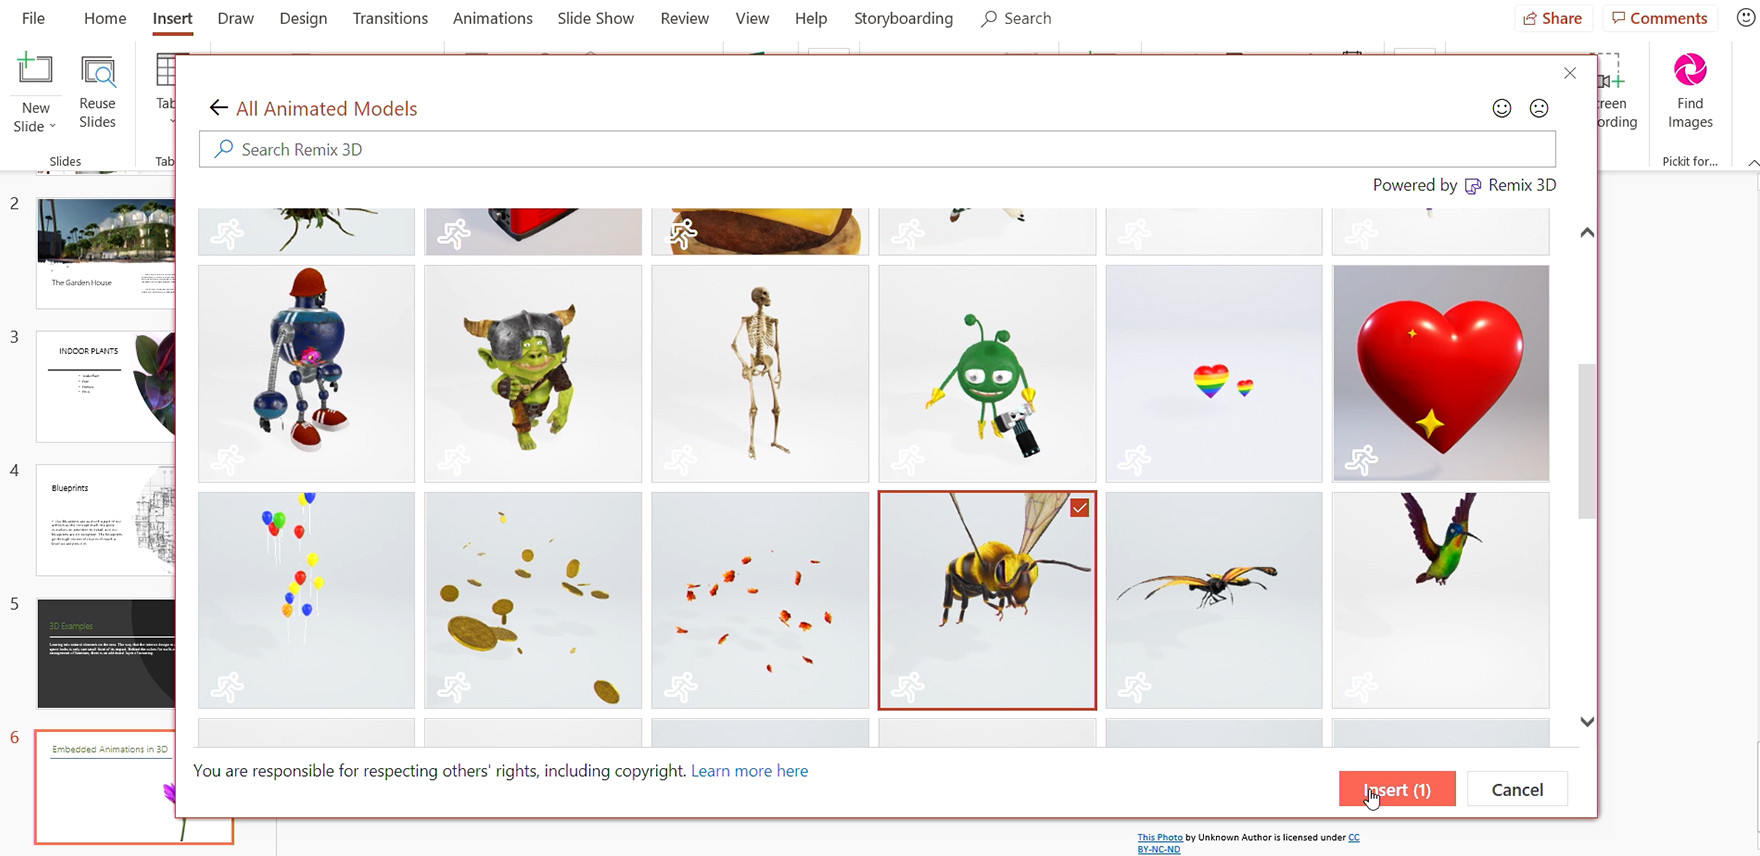 PowerPoint deck, selection of embedded animations, choosing a bee with wings in motion